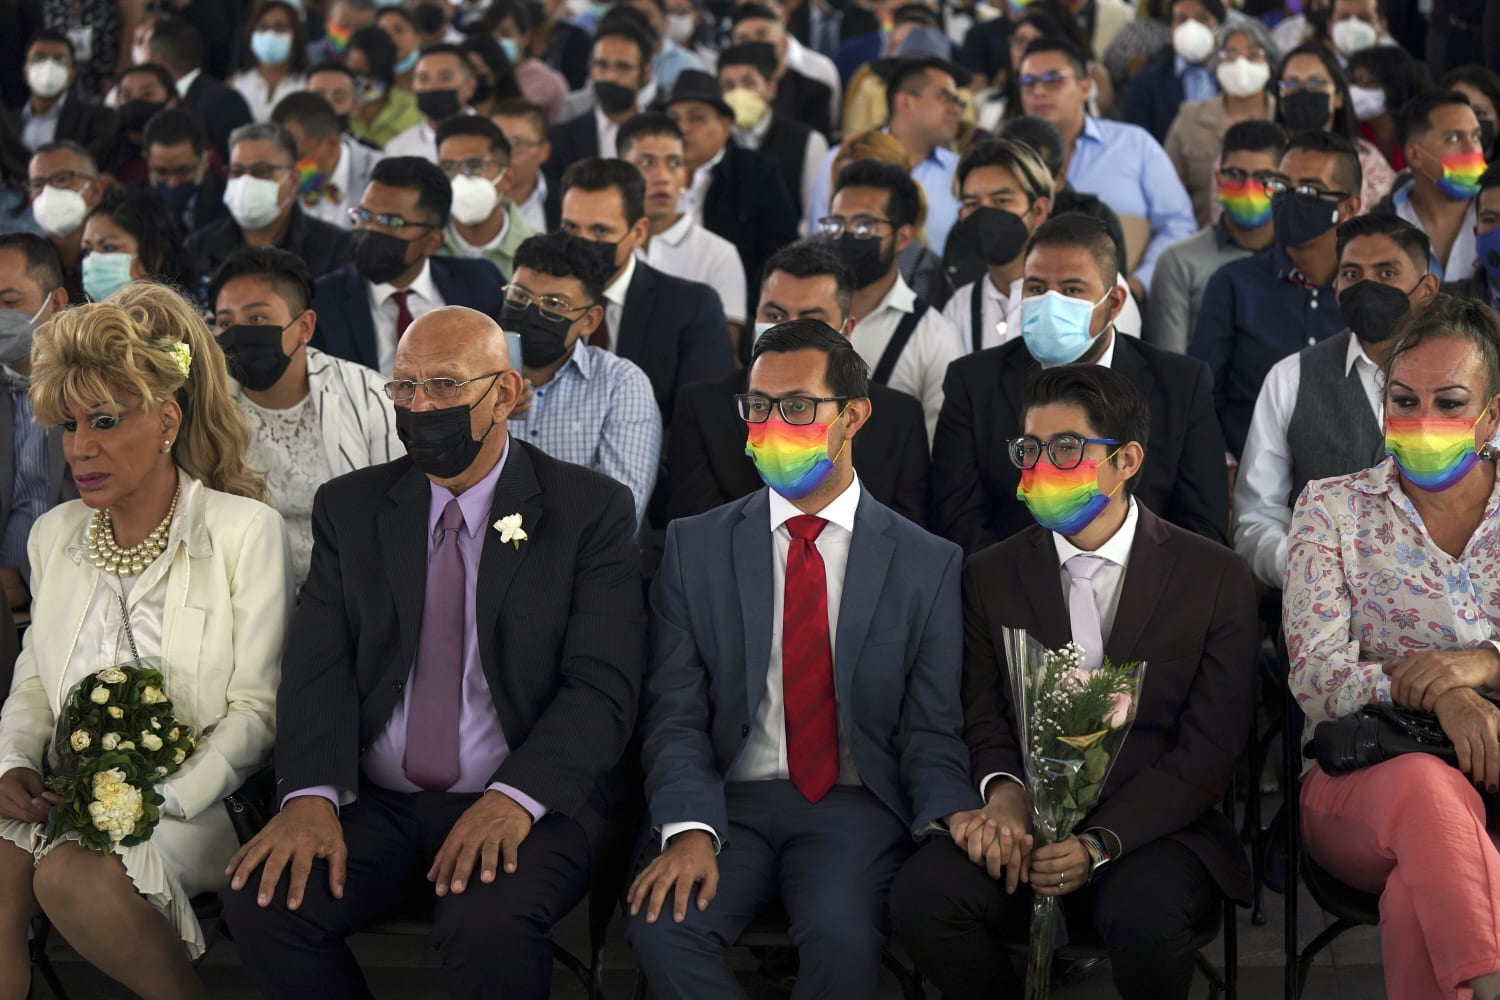 100 Same-Sex Couples Get Married in Mexico City Mass Wedding image